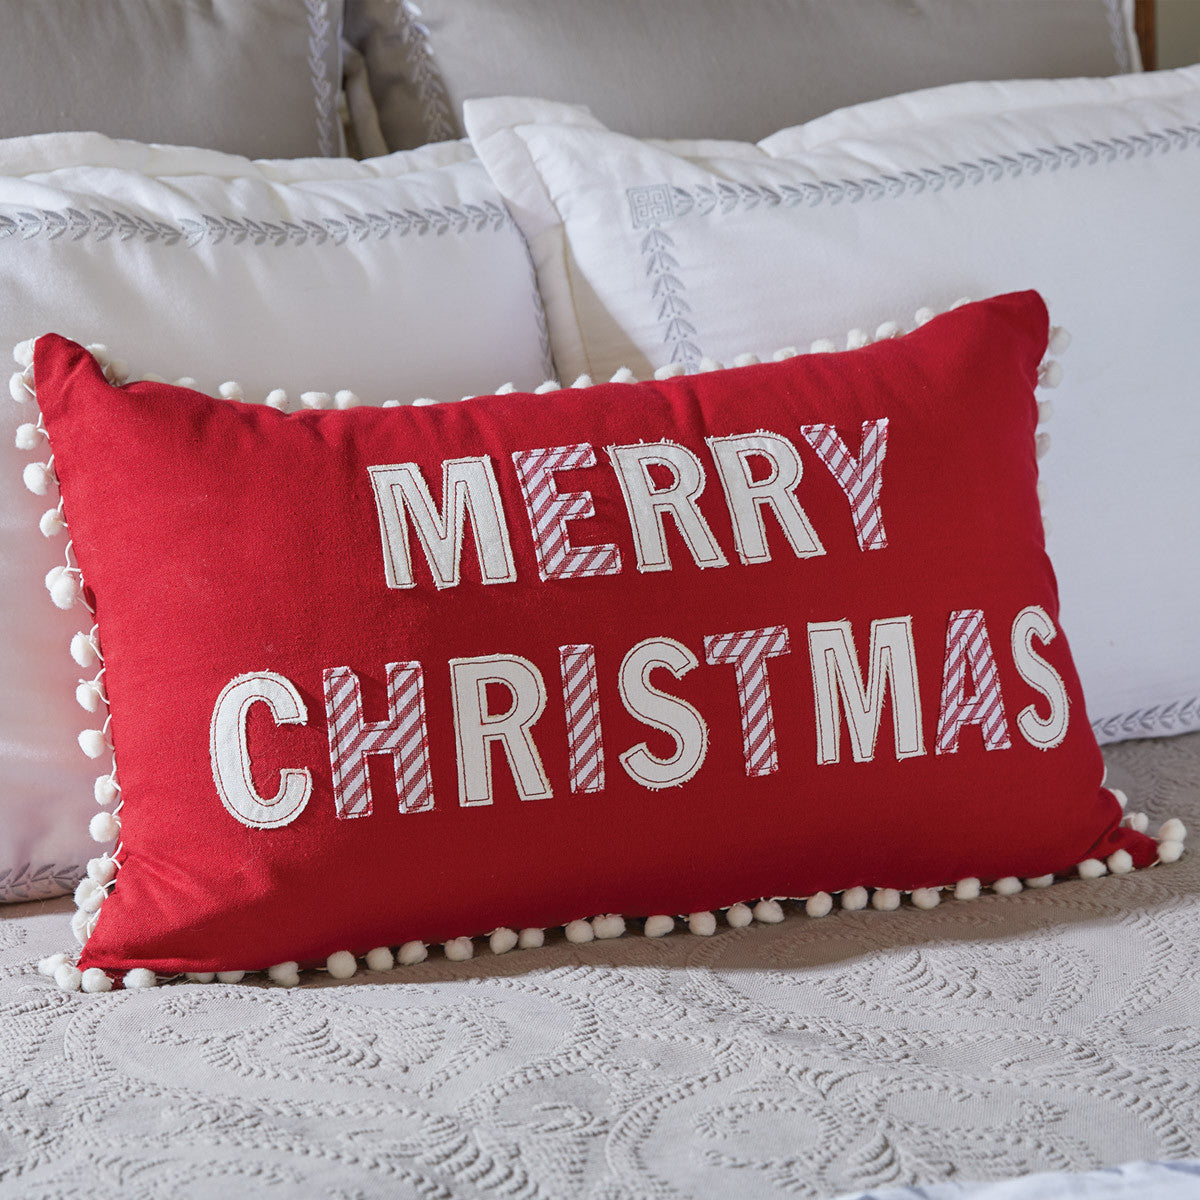 MERRY CHRISTMAS PILLOW 16X26 - POLY INSERT * – The Garden Room and Home